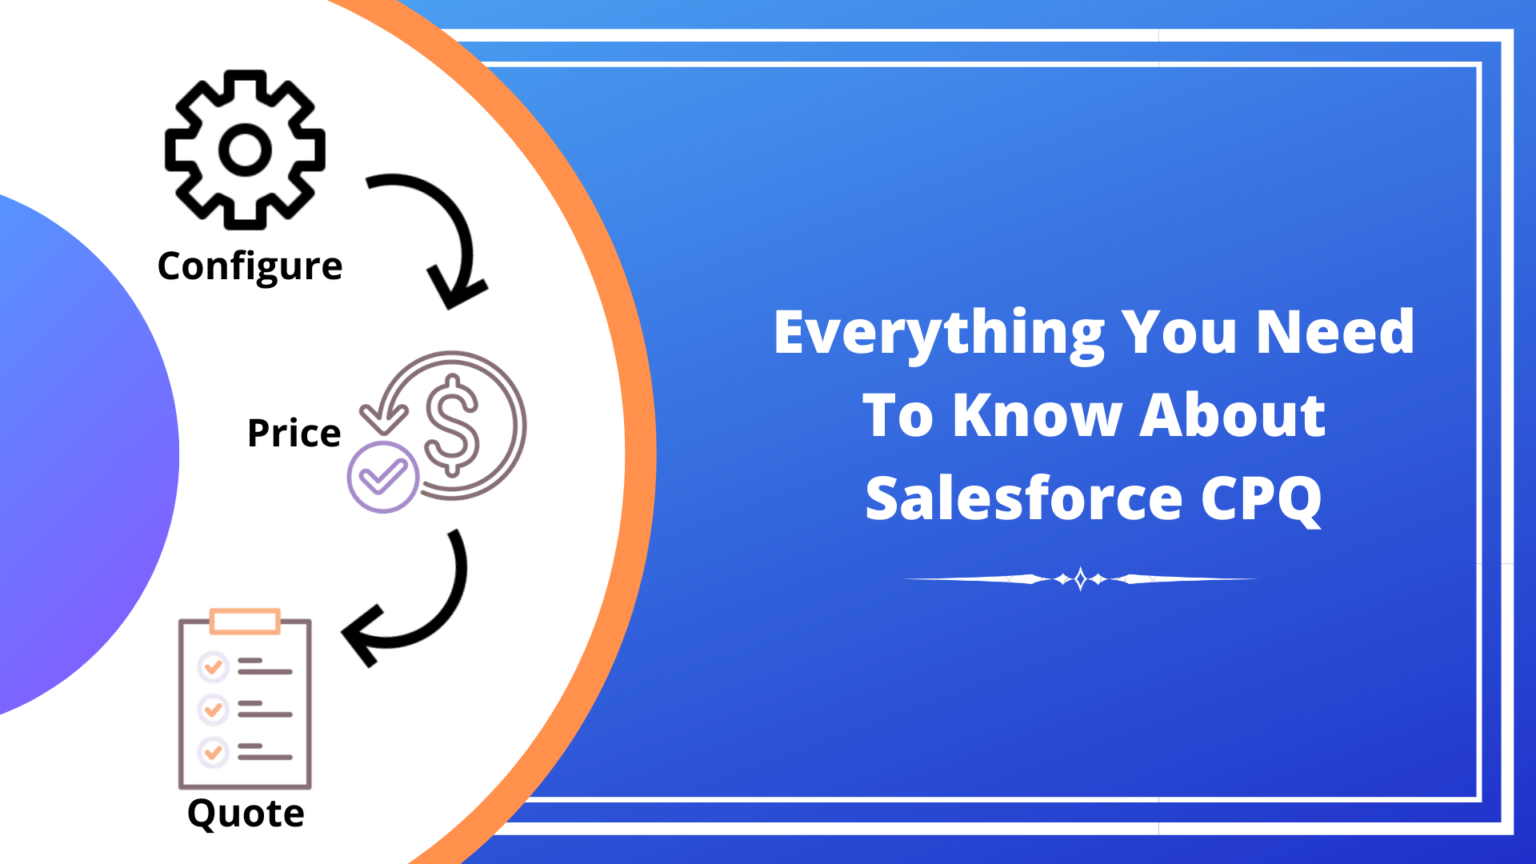 What is Salesforce CPQ and How It Benefits the Sales Team?